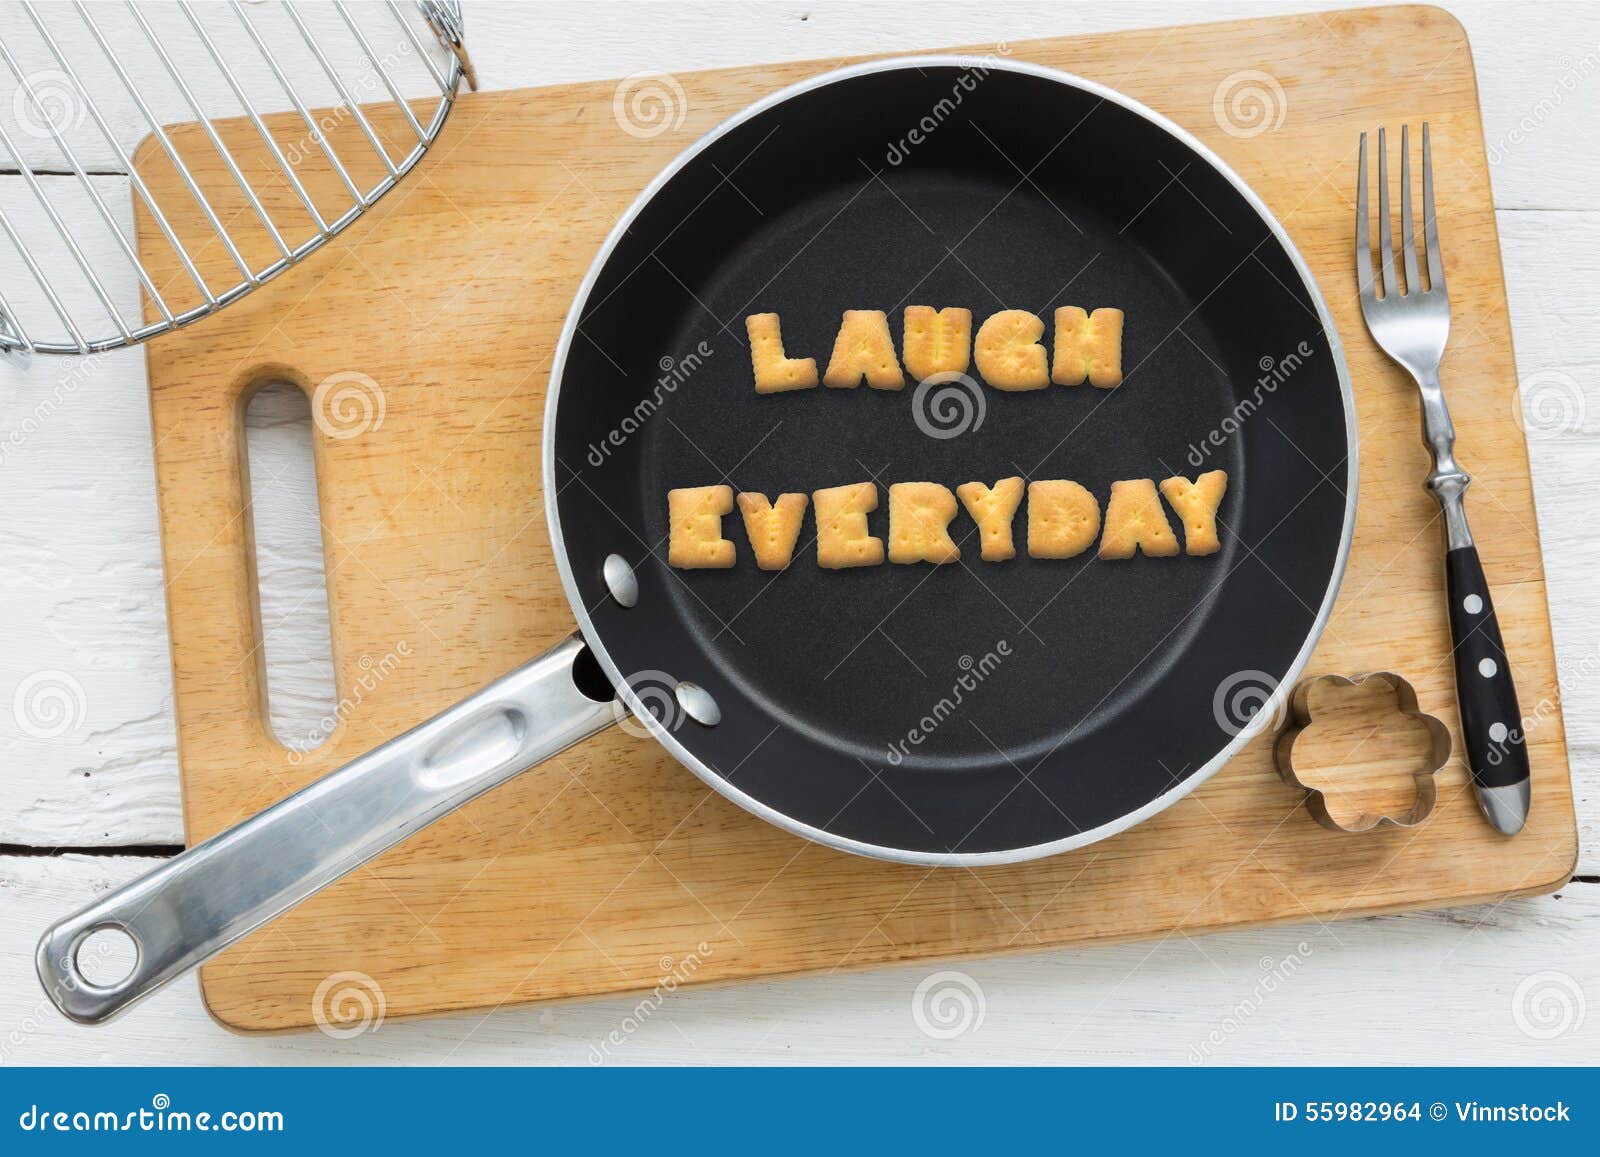 letter cookies word laugh everyday and kitchen utensils